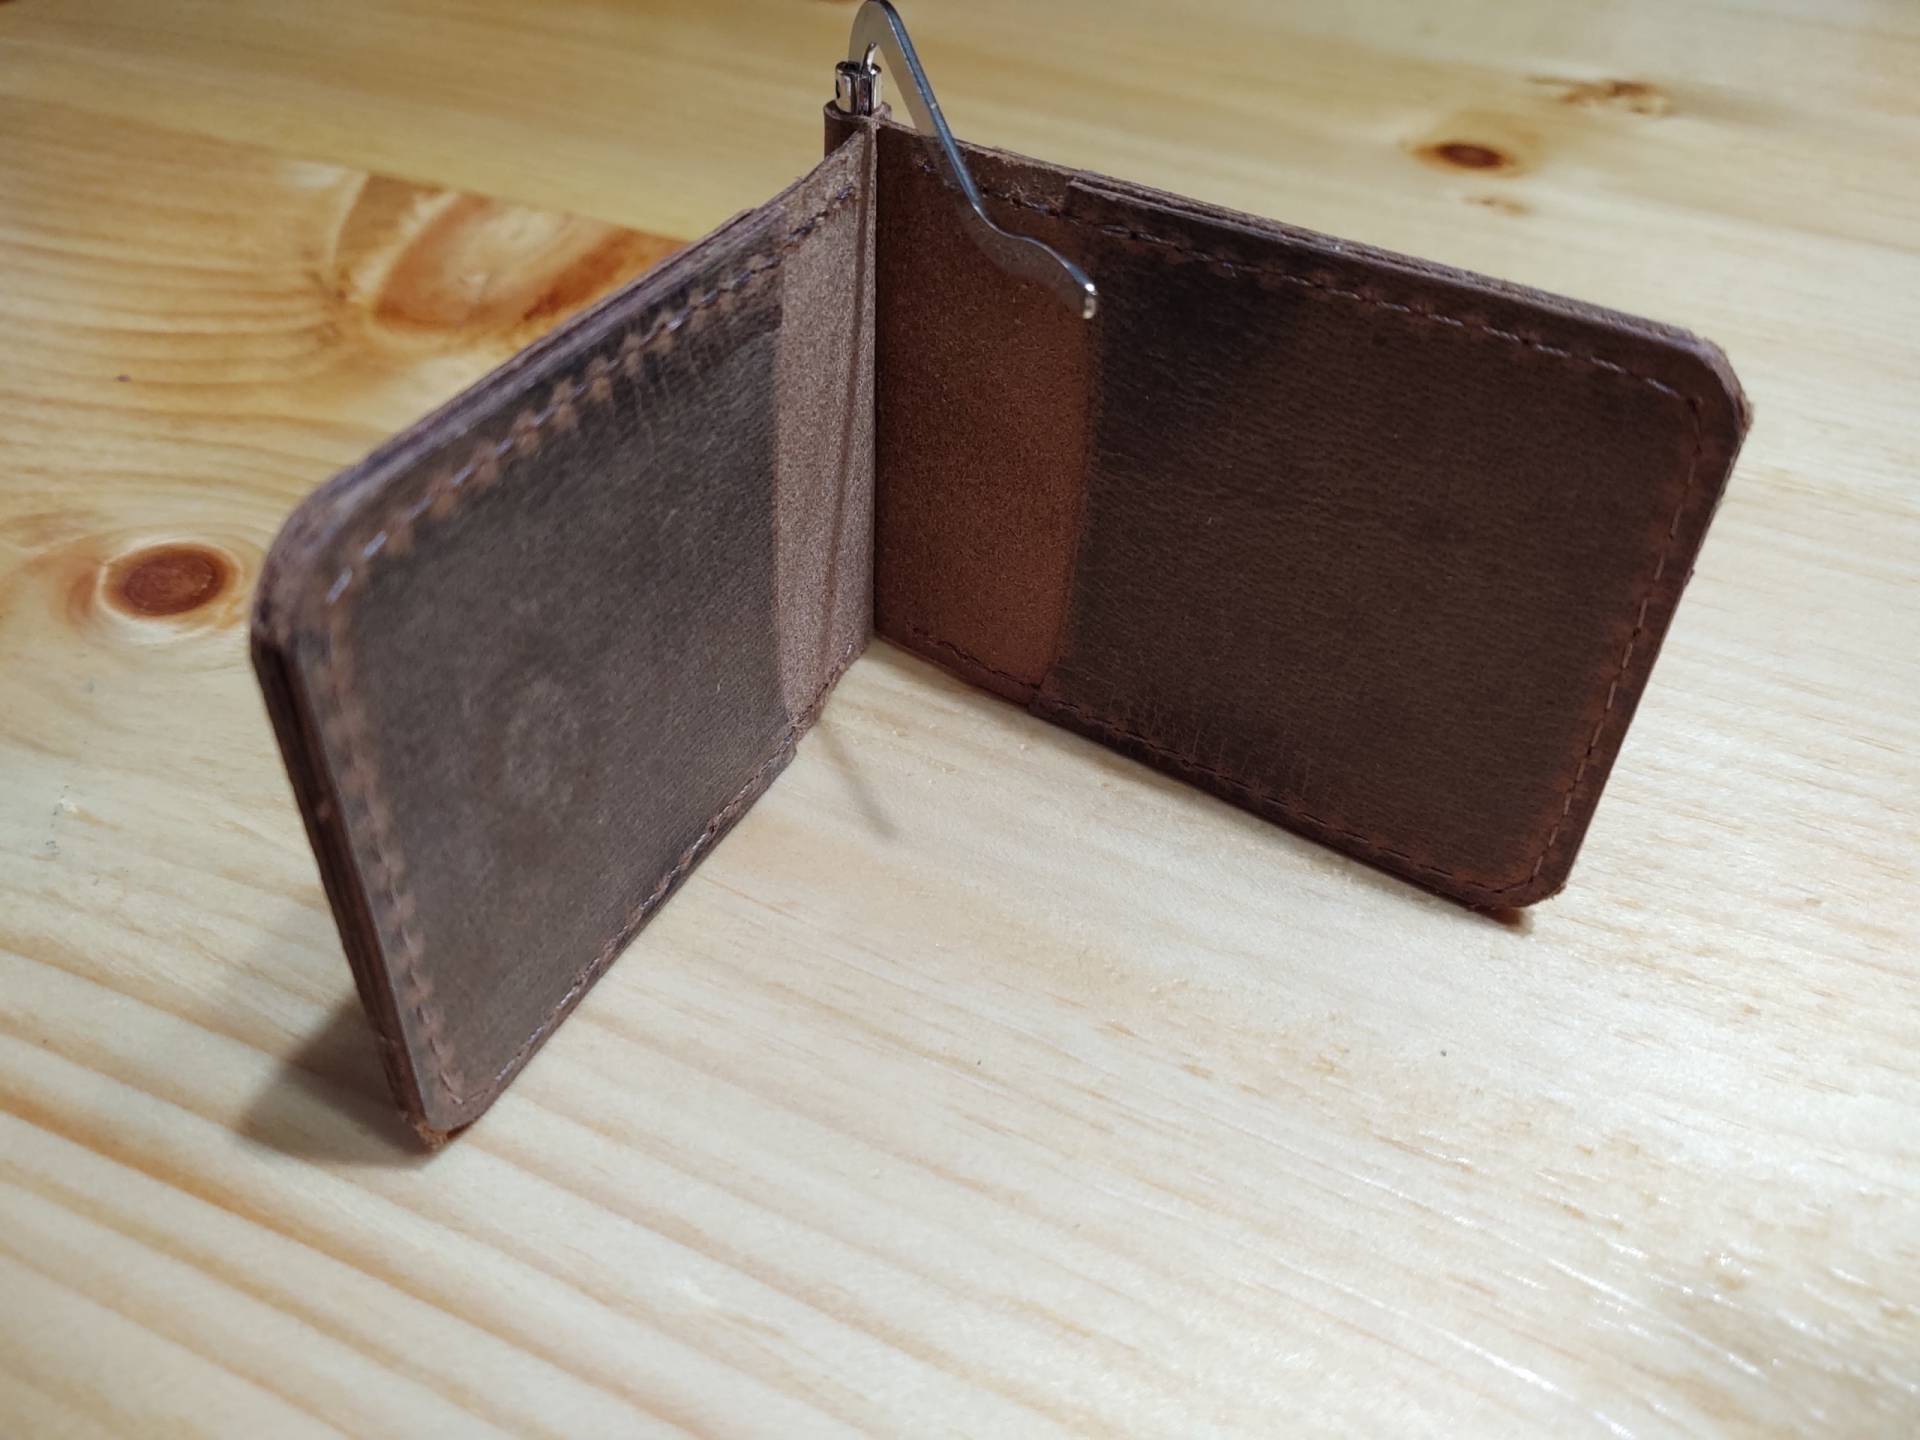 Buffalo Minimalist Front Pocket Wallet with Clip